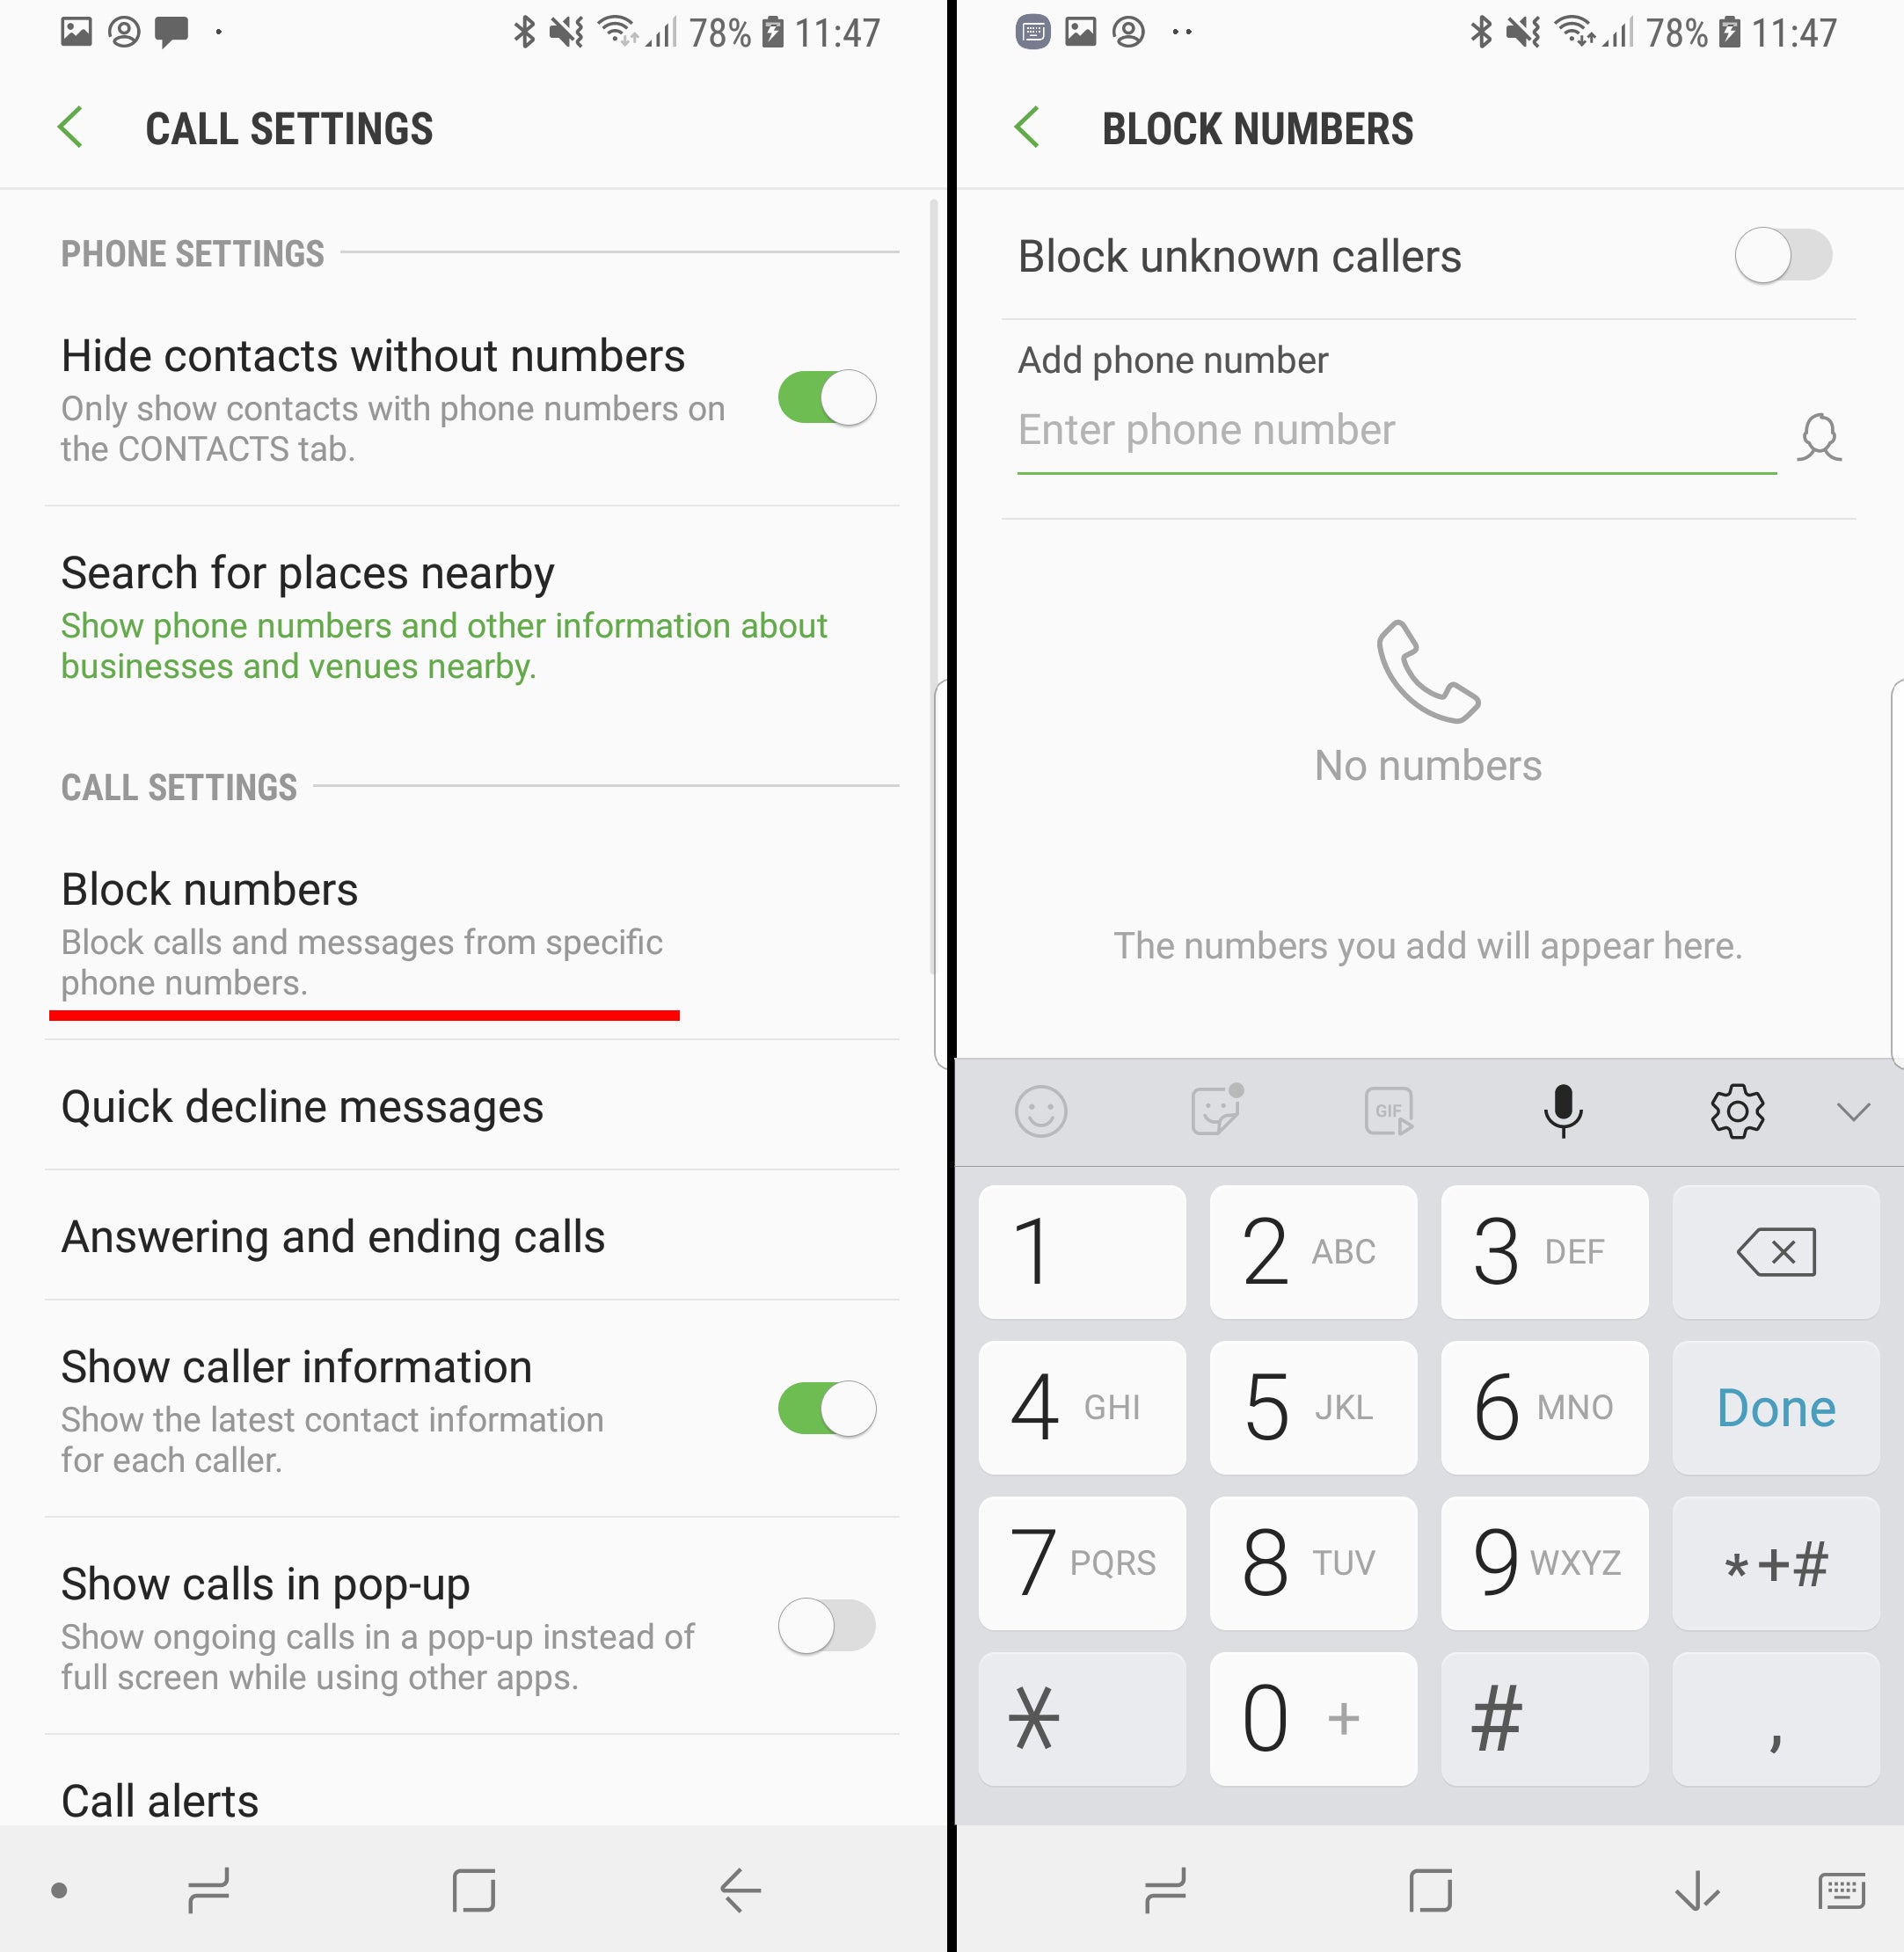 Samsung Galaxy S9/S9+ tutorial: How to block phone numbers from calling or messaging you